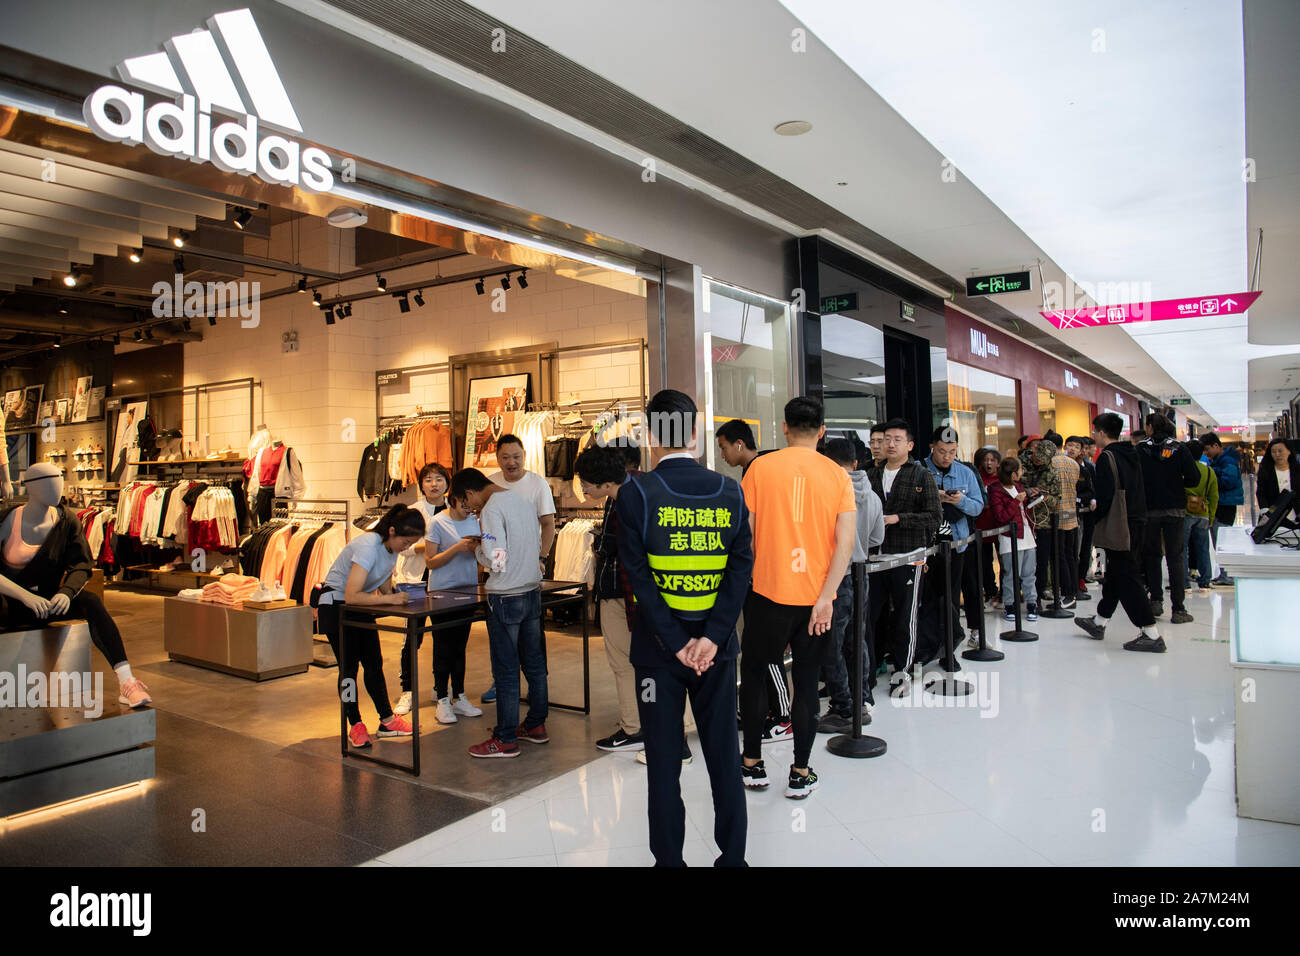 Consumers line up to buy the newly-released Adidas Yeezy, a collaboration  between German sportswear brand Adidas and American rapper Kanye West, at a  Stock Photo - Alamy